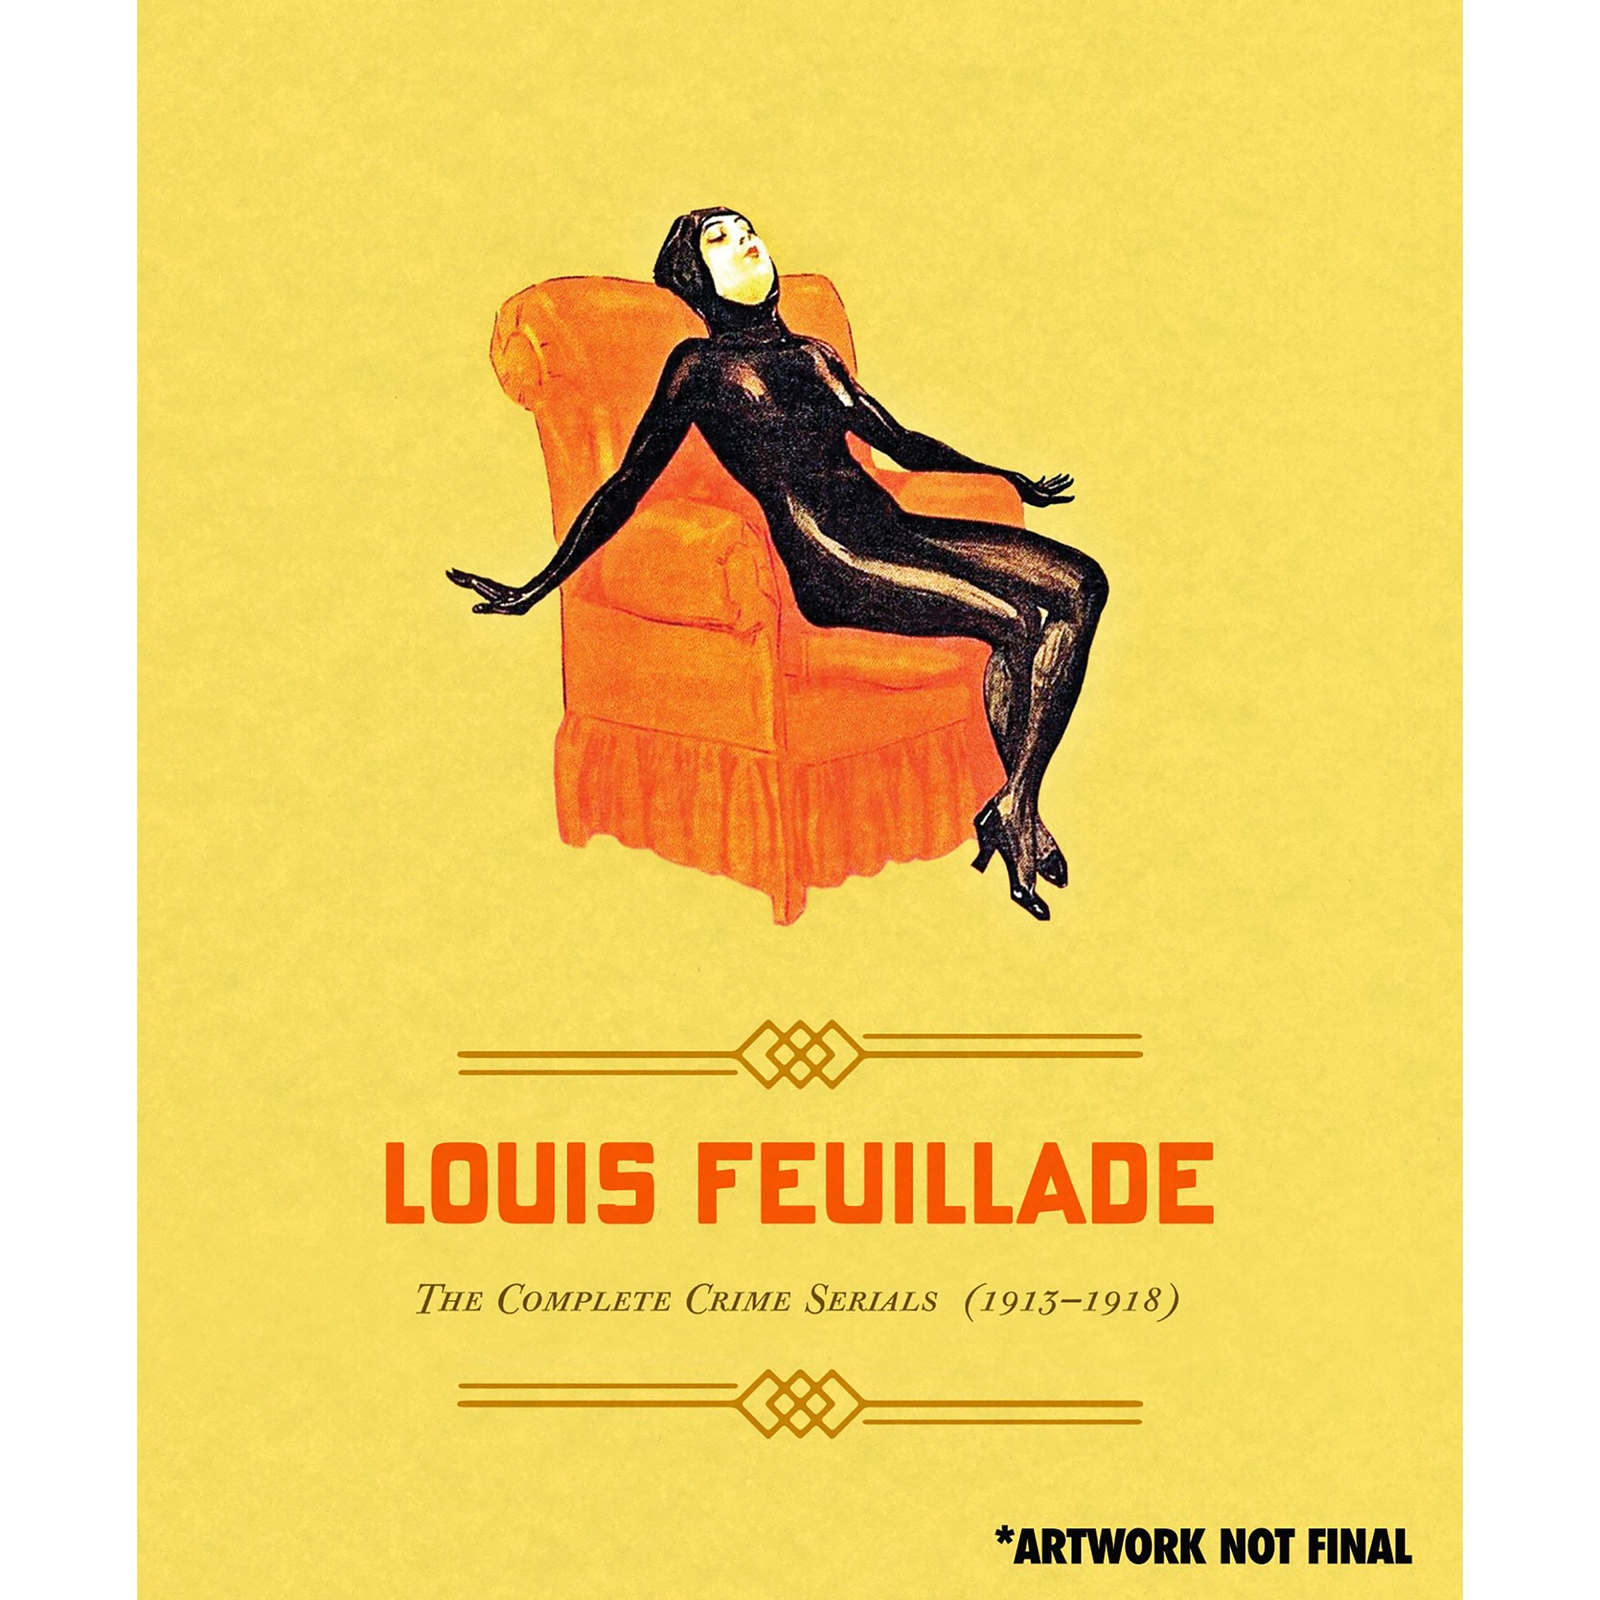 LOUIS FEUILLADE: THE COMPLETE CRIME SERIALS (1913-1918) (Masters of Cinema) Limited Edition 10-Disc Blu-ray von Masters Of Cinema